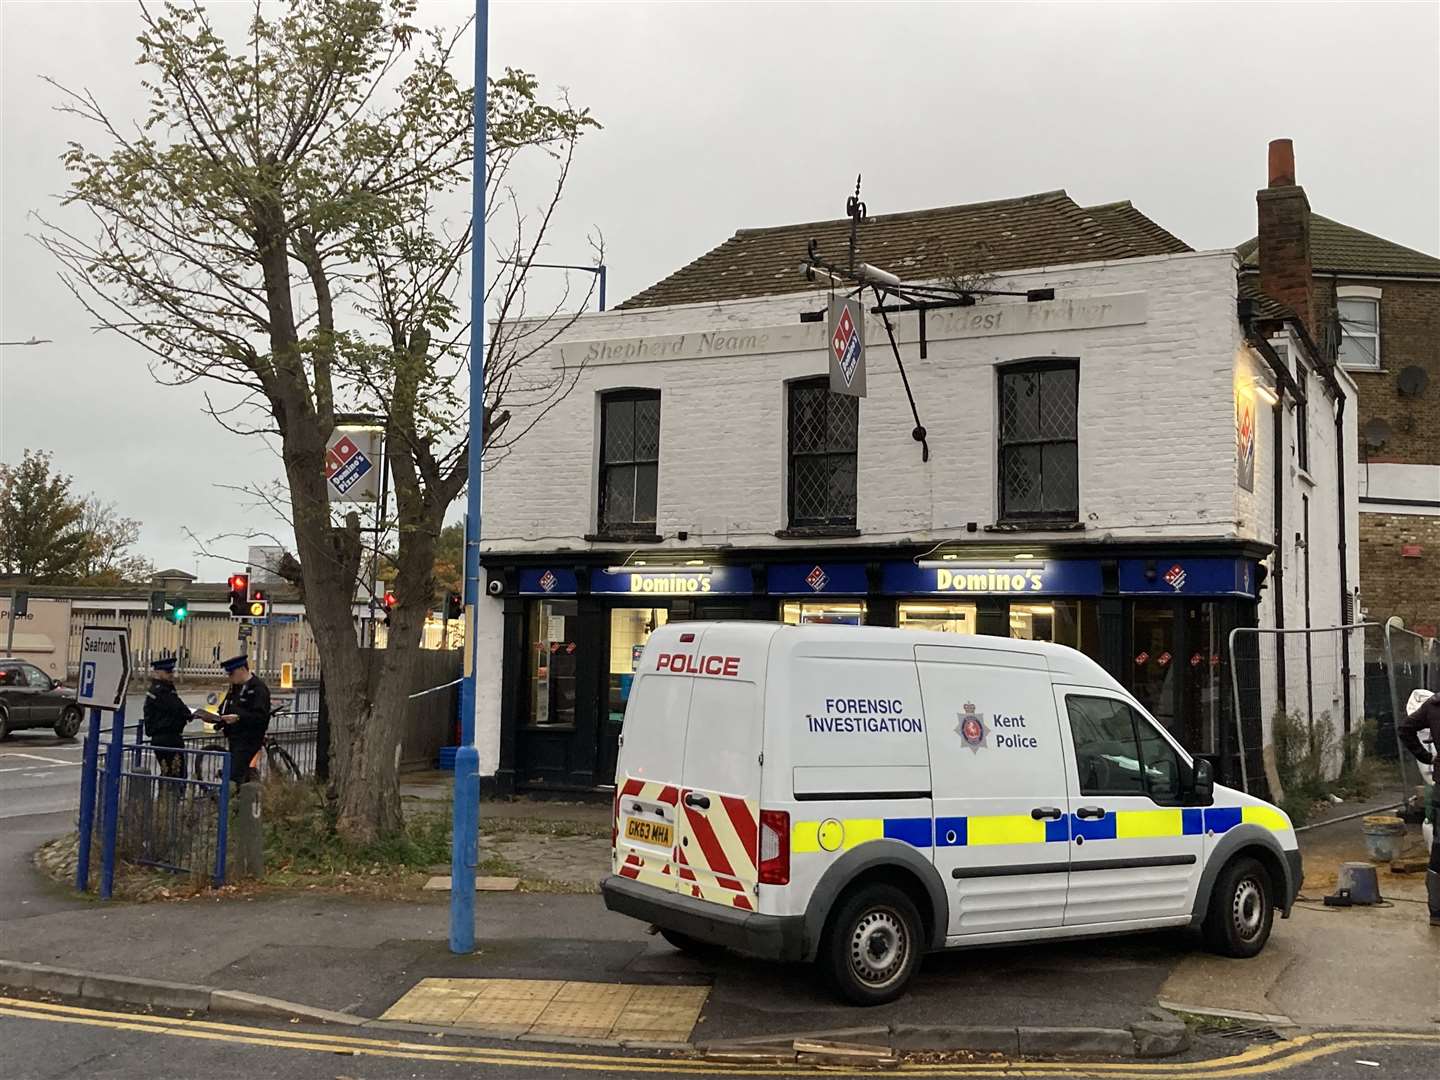 Police are appealing for information after a man was found seriously injured inside a flat in Victory Street, Sheerness